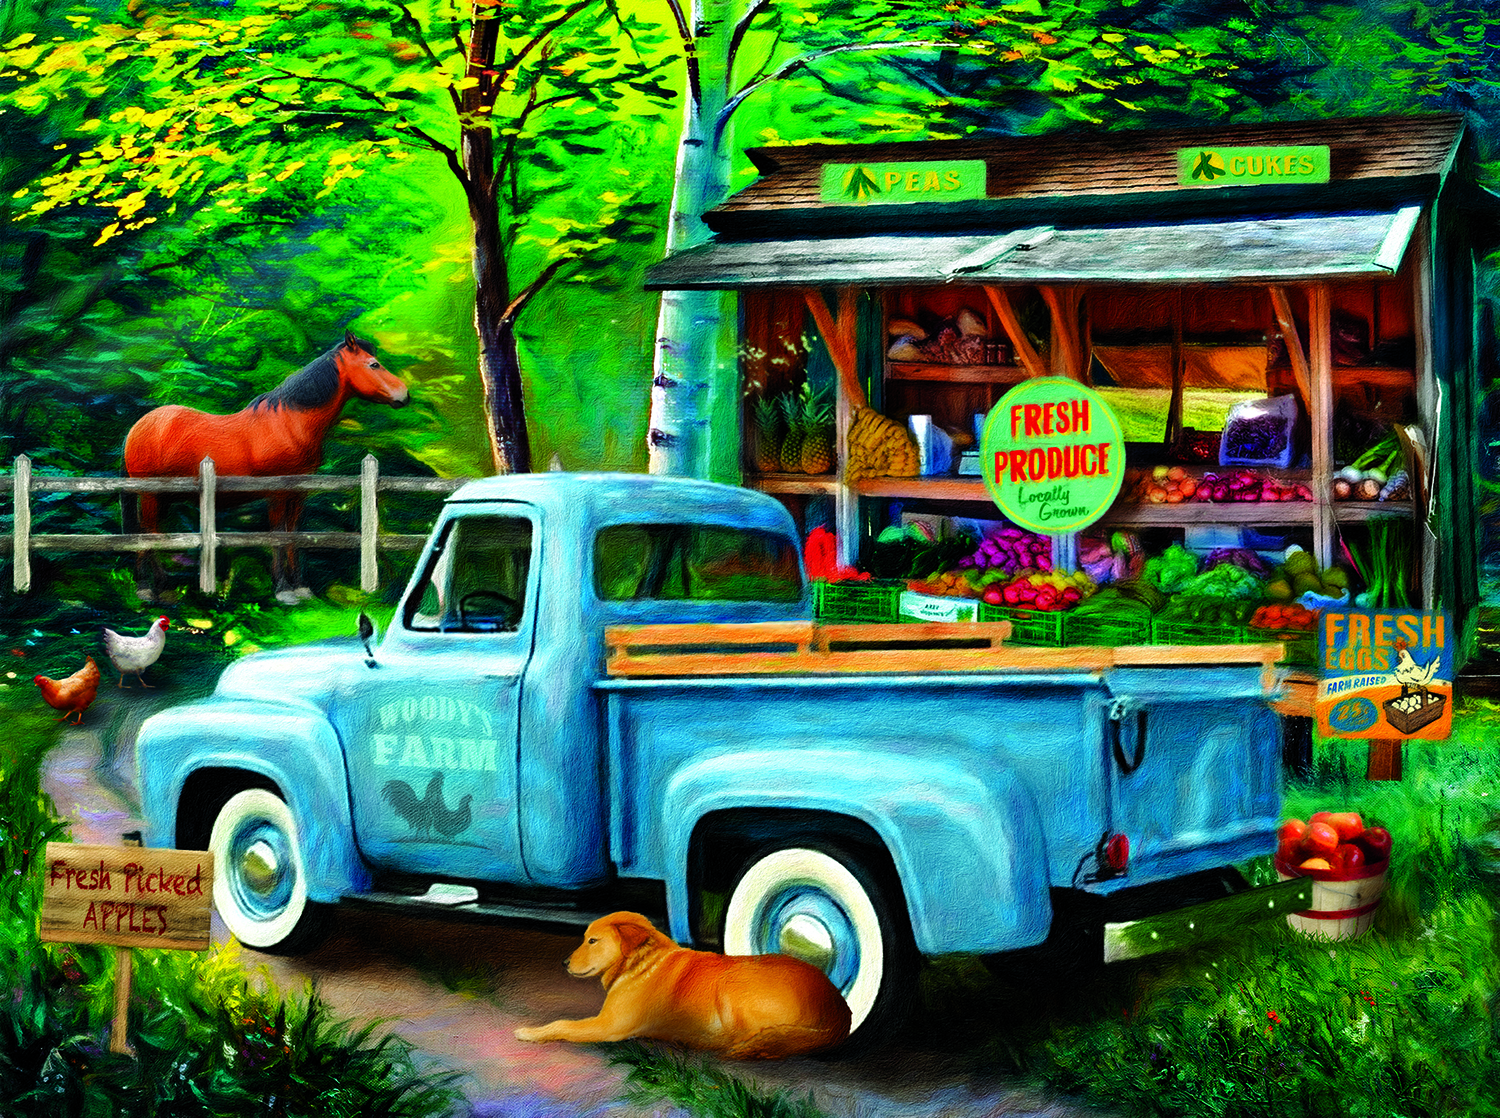 Woody's Farm Stand